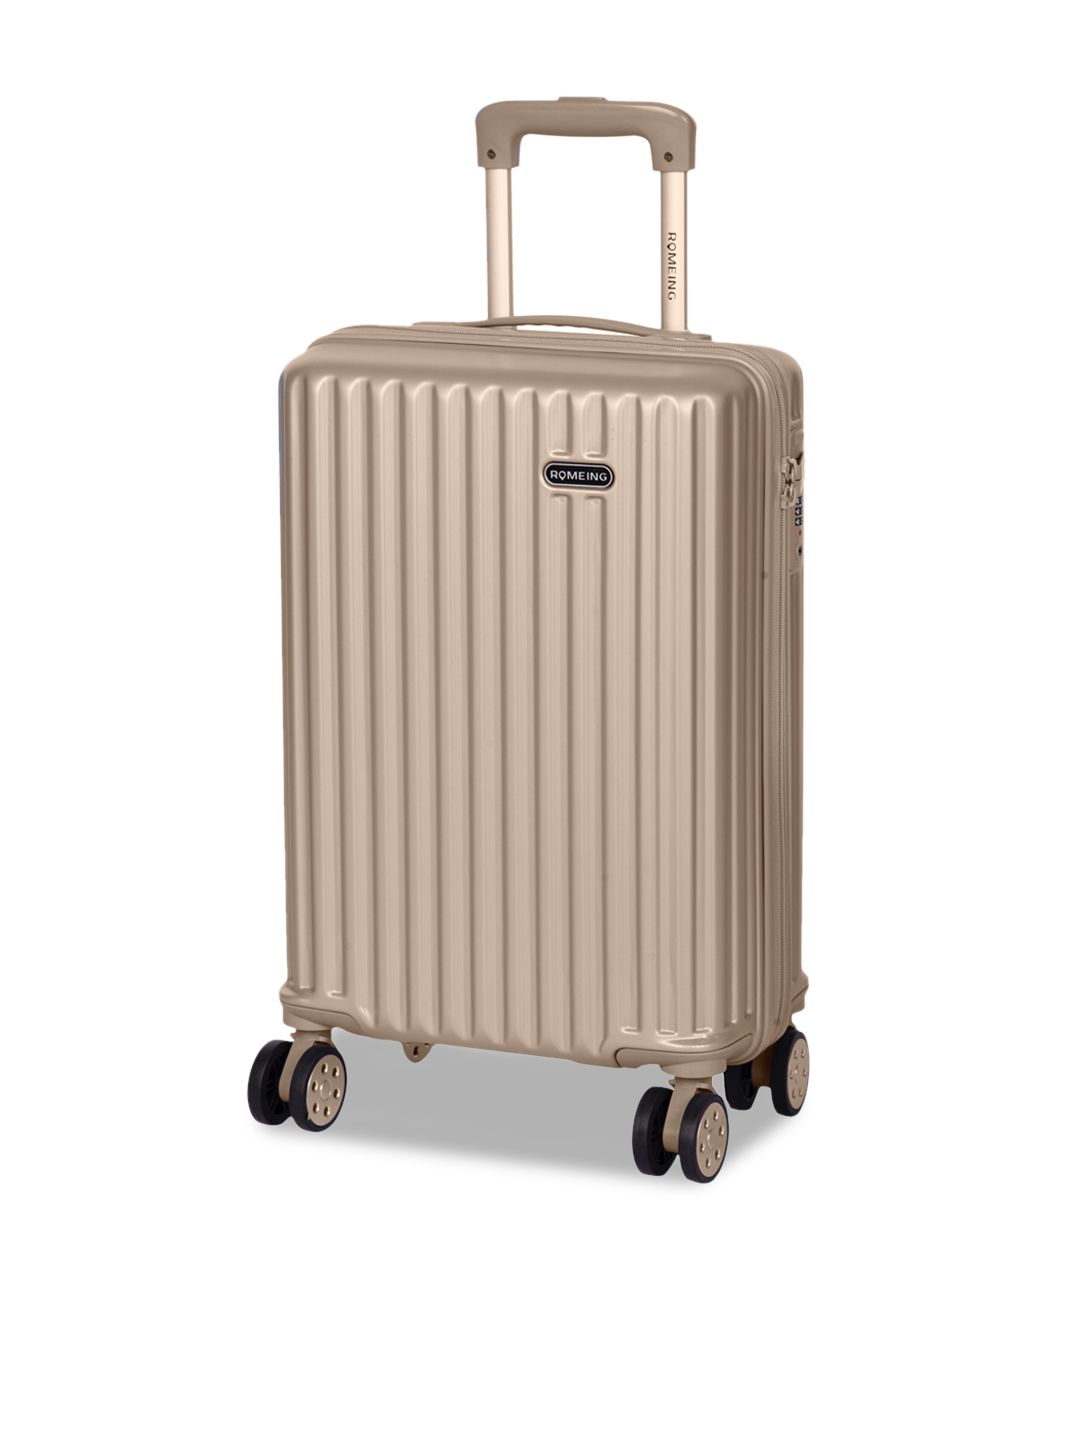 ROMEING Genoa Gold-Toned Polycarbonate Hard-Sided Cabin Trolley Suitcase Price in India